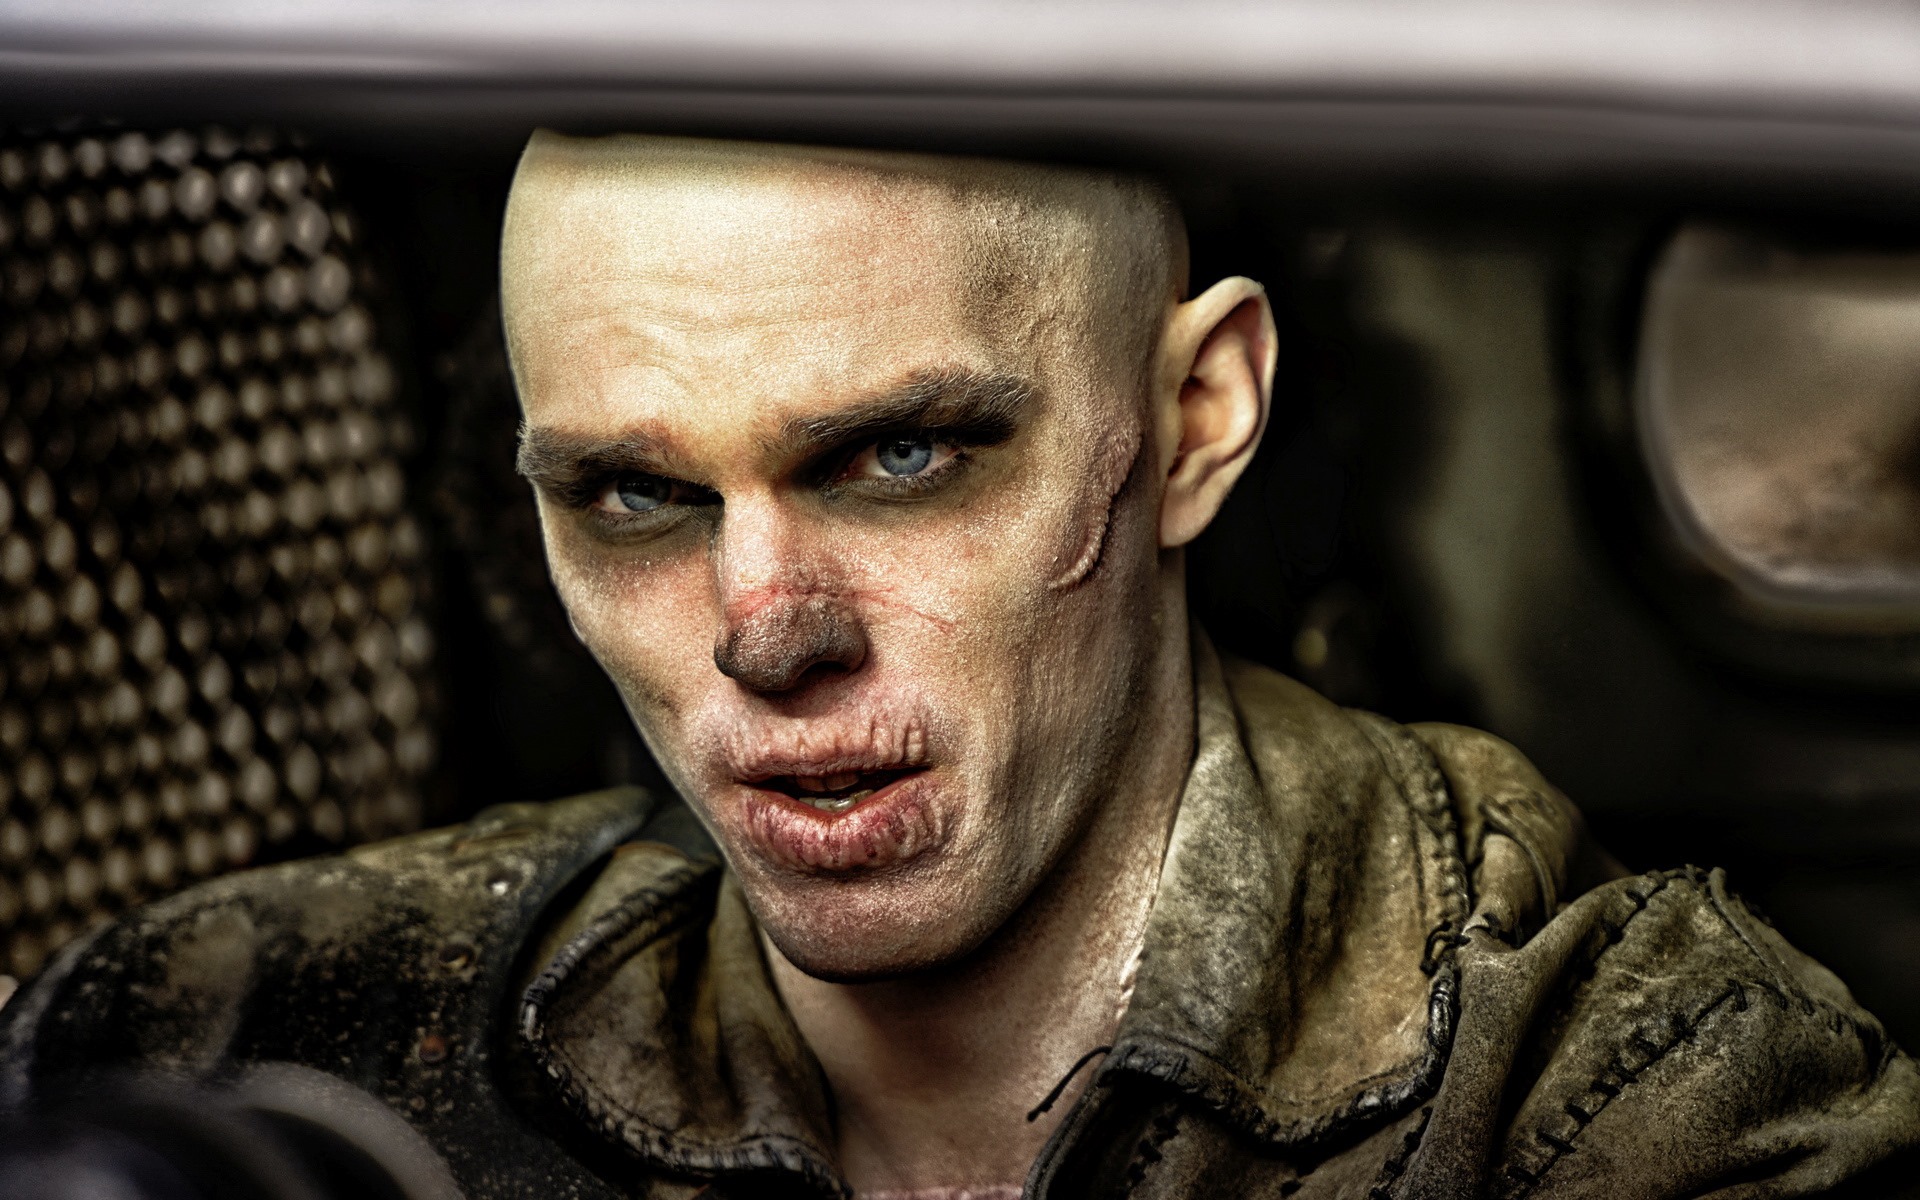 Mad Max: Fury Road, HD movie wallpapers #37 - 1920x1200